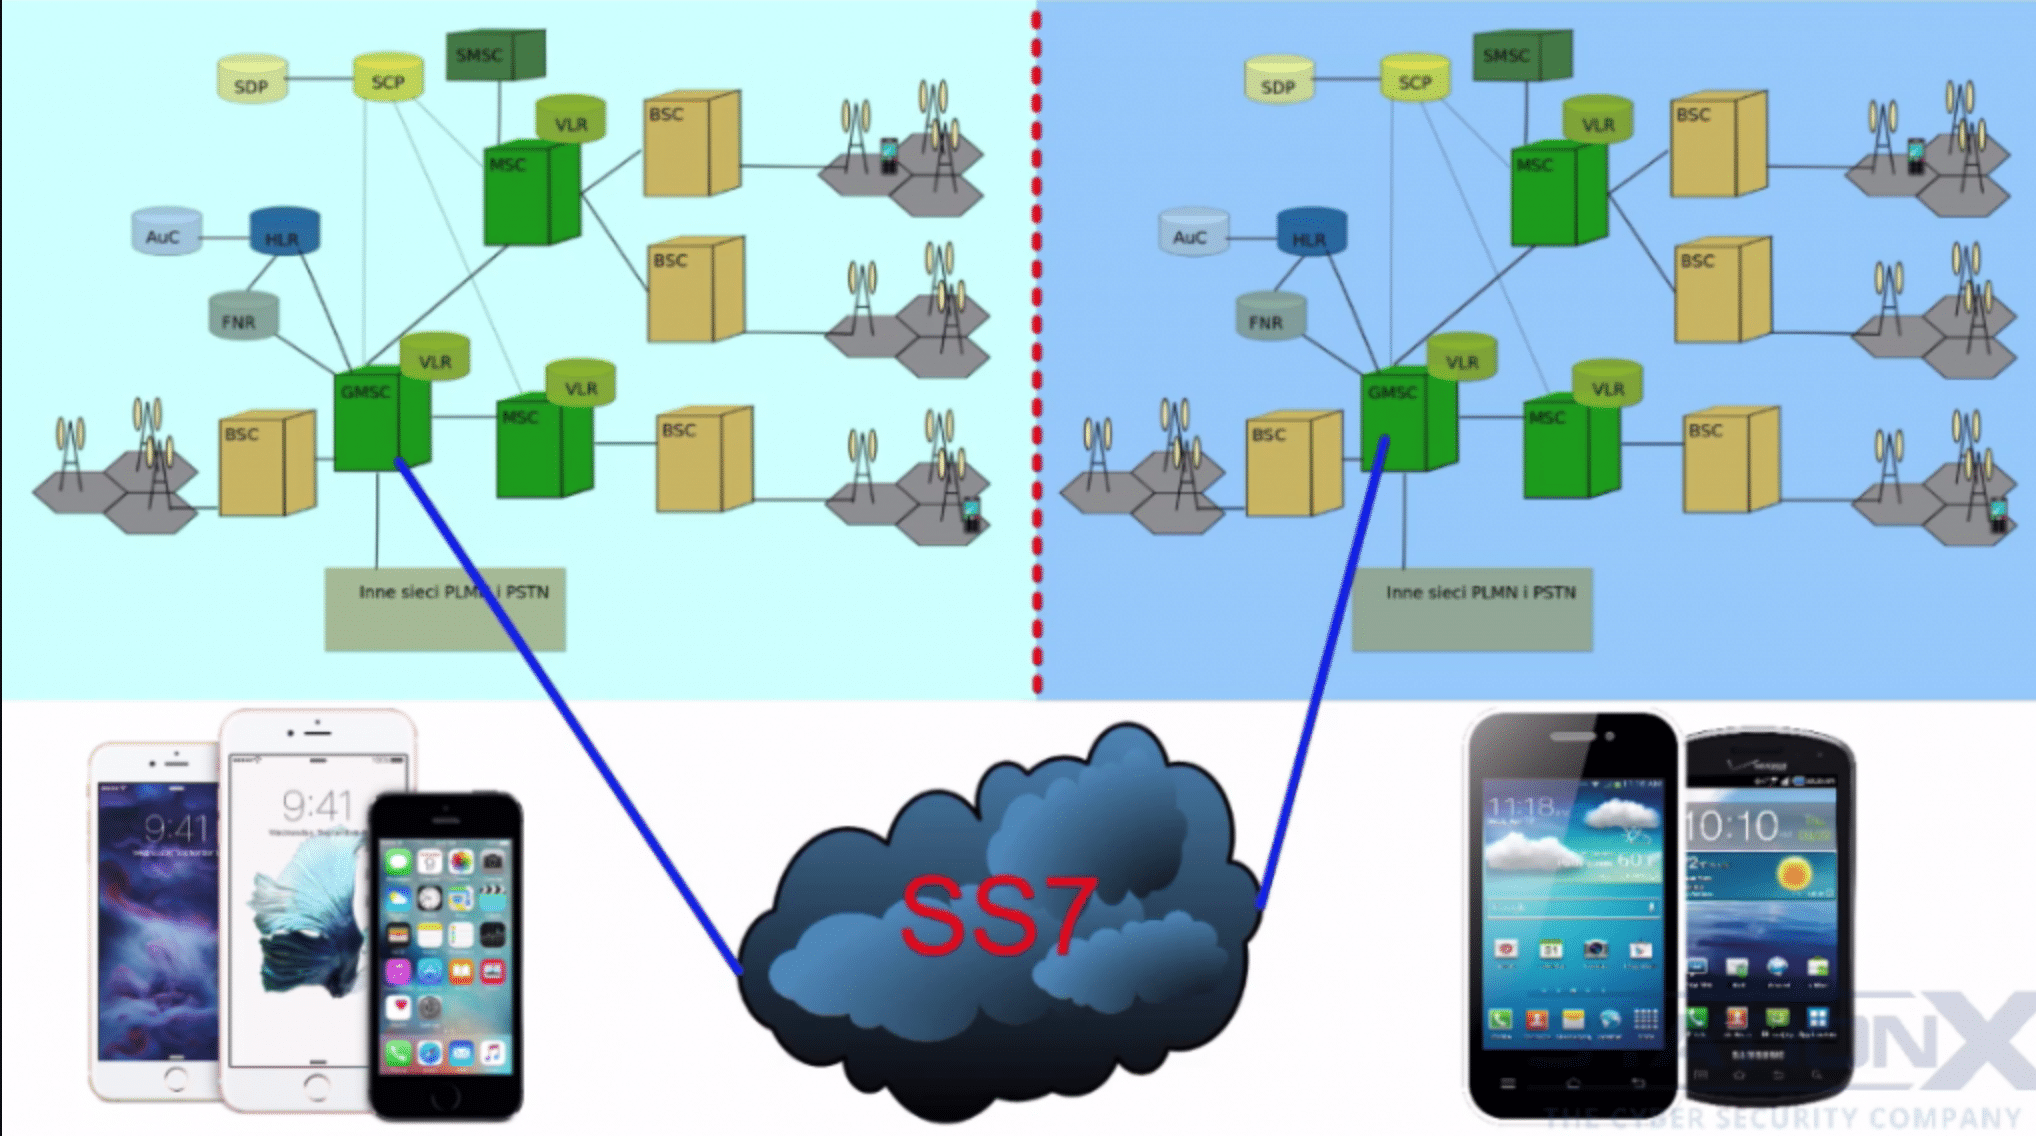 cellular networks and ss7 explained